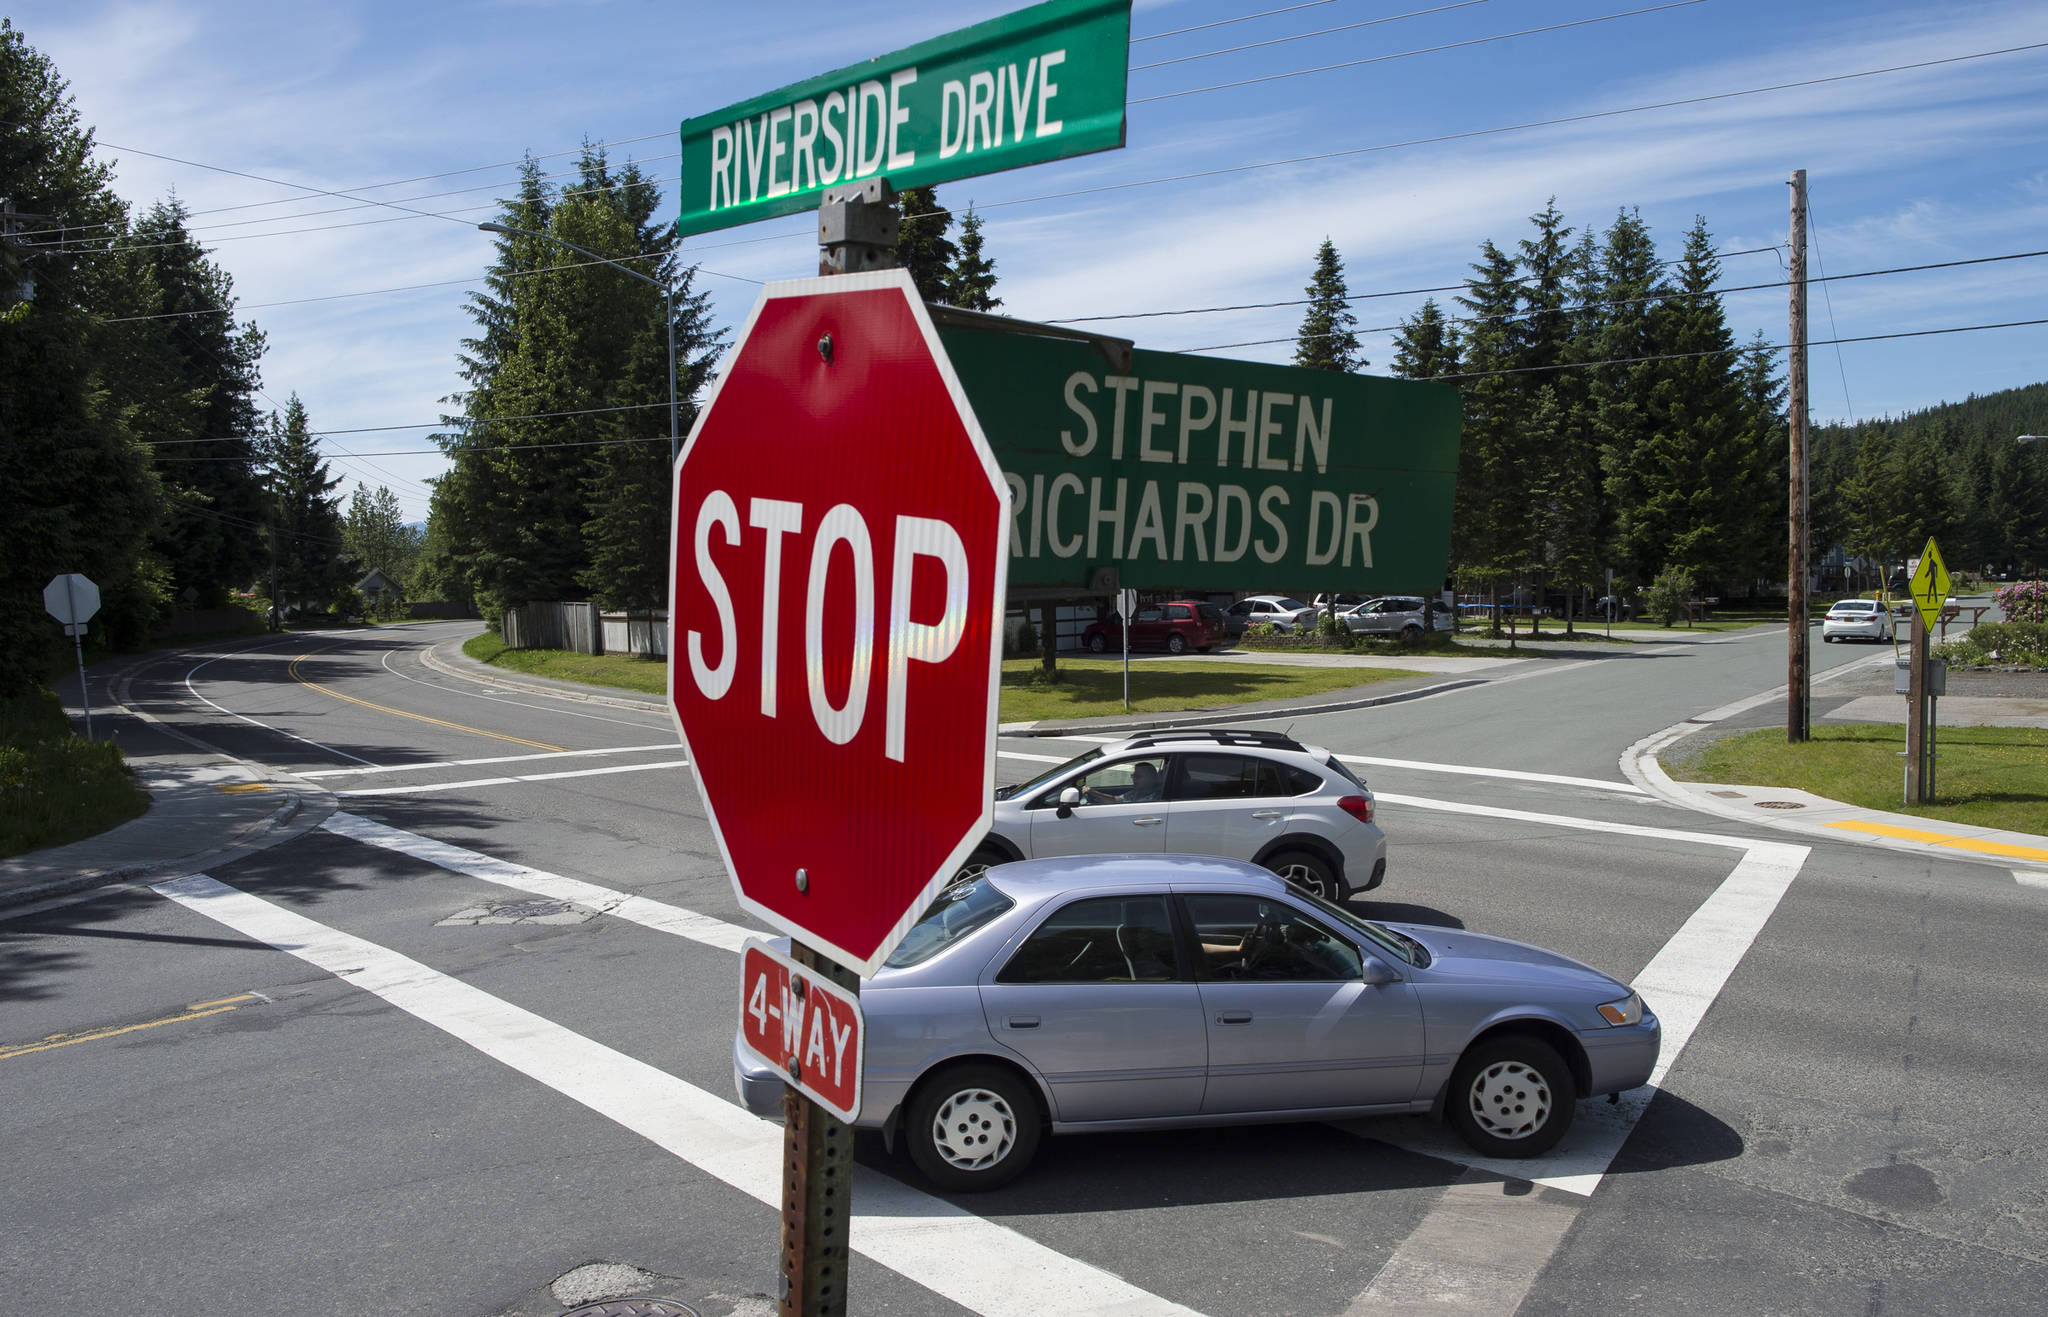 The intersection of Riverside Drive and Stephen Richards Drive in the Mendenhall Valley on Tuesday, June 19, 2018. (Michael Penn | Juneau Empire)